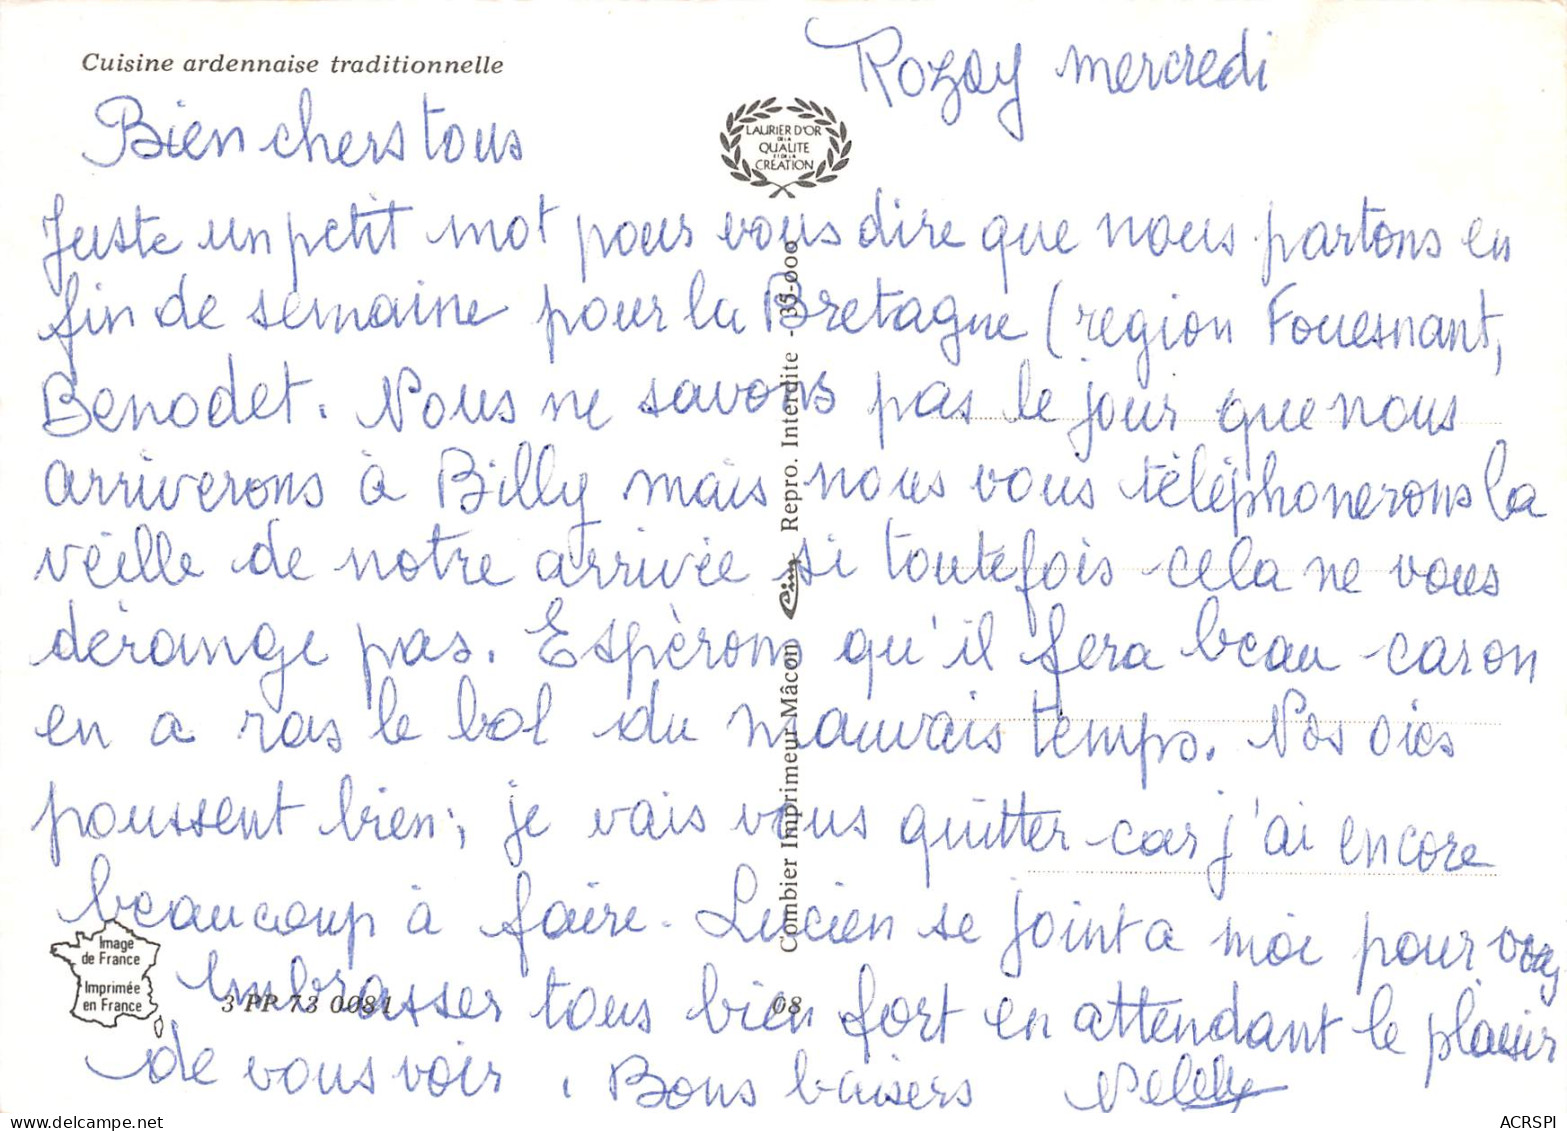 08 Rozay Cuisine Ardennaise Traditionnelle  9 (scan Recto Verso)MF2750BIS - Revin